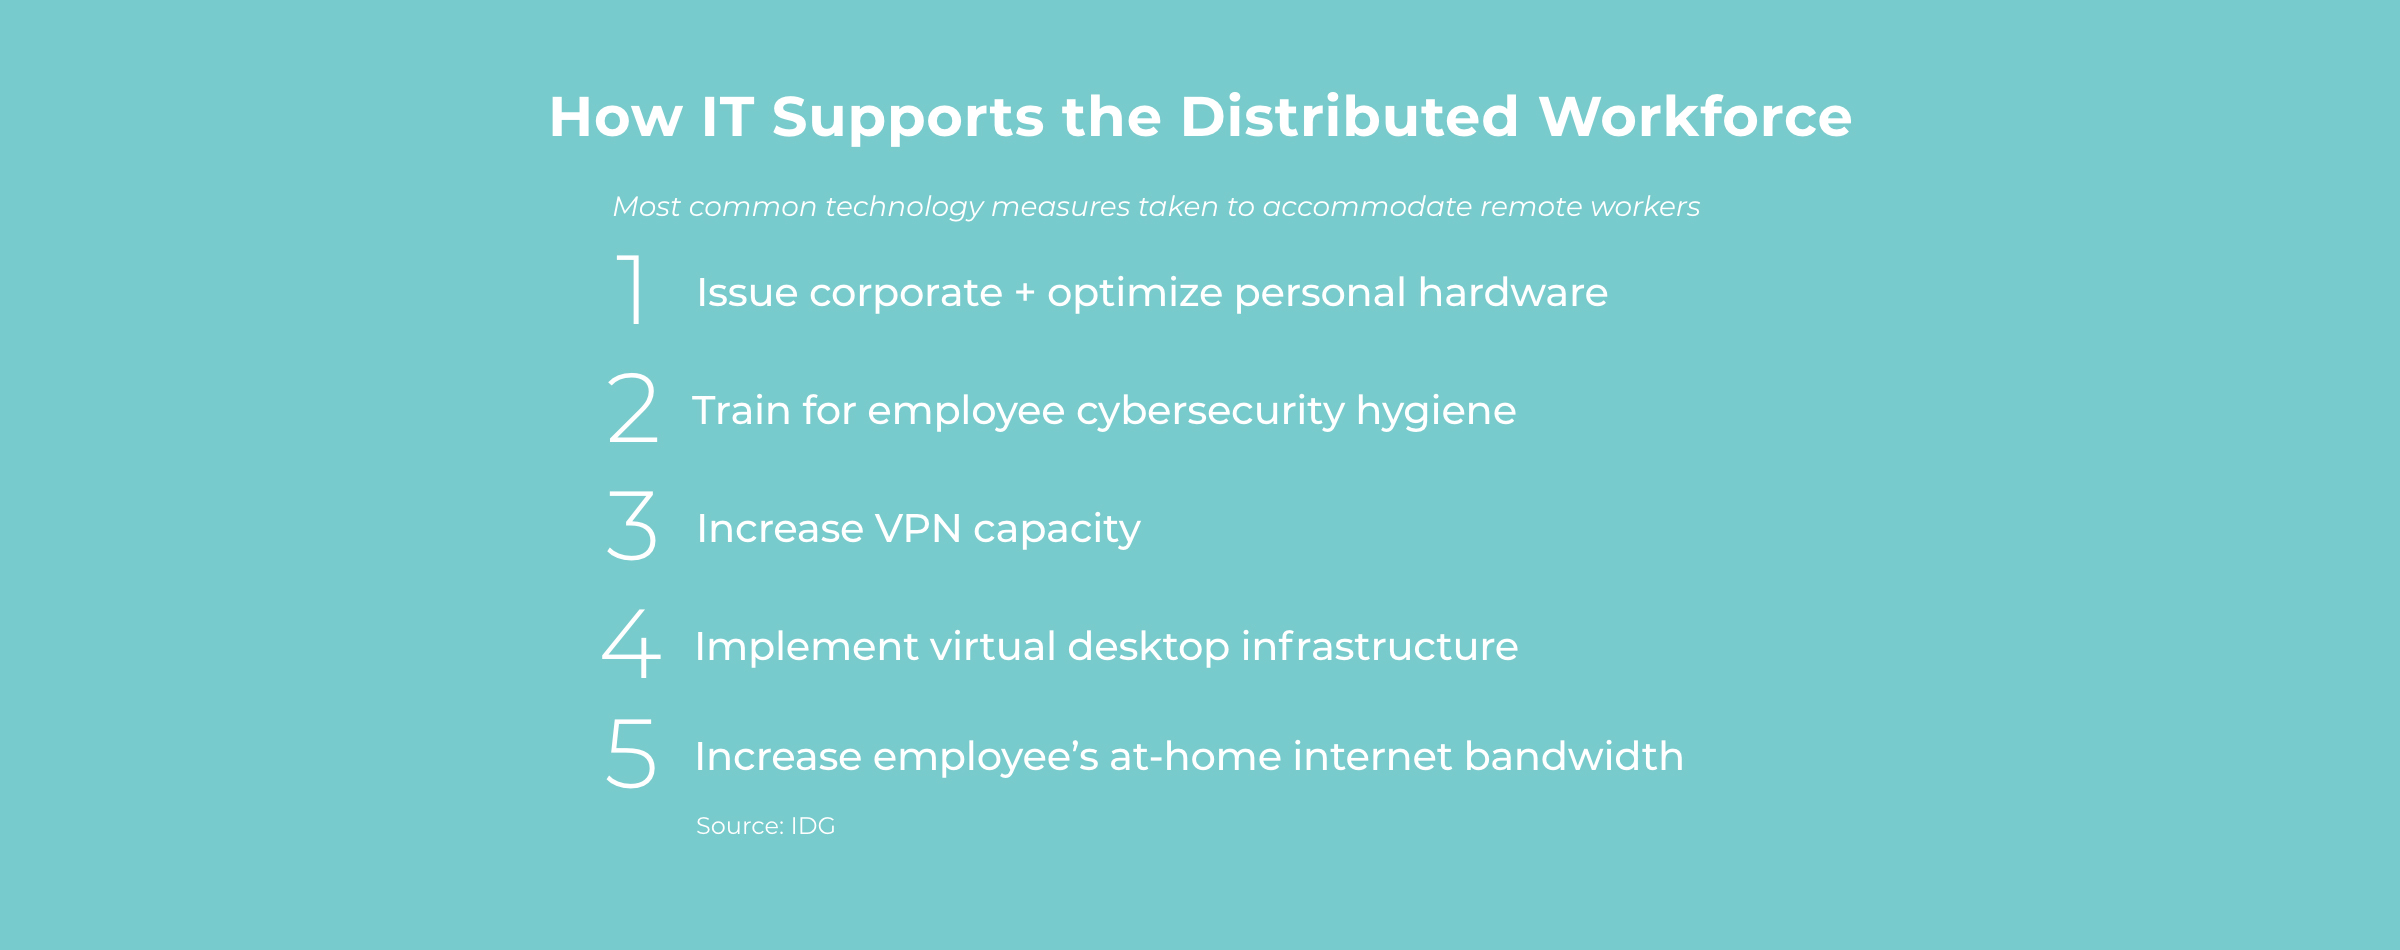 IT Distributed Workforce - 5 Tips